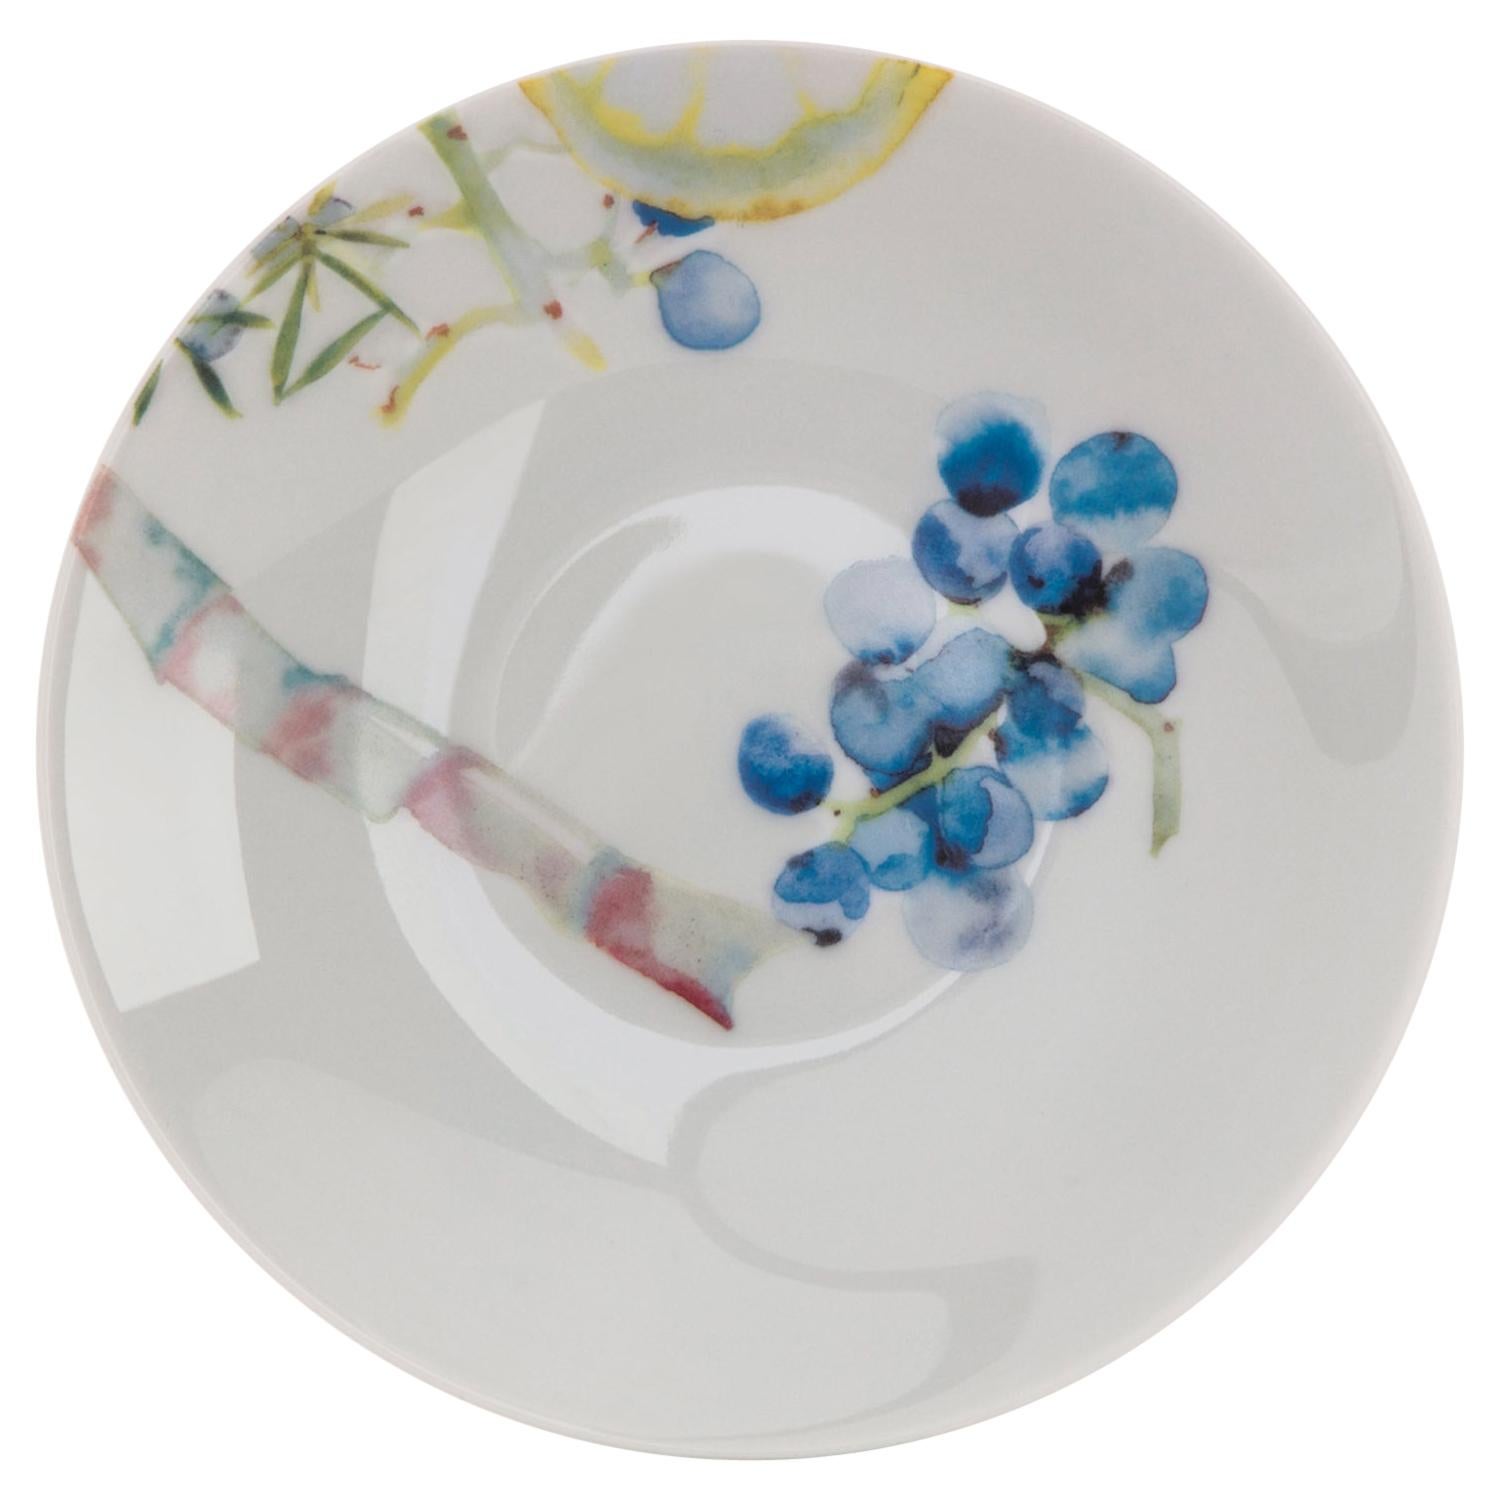 Multicolored French Limoges Porcelain Appetizer Plate, Exclusive Edition